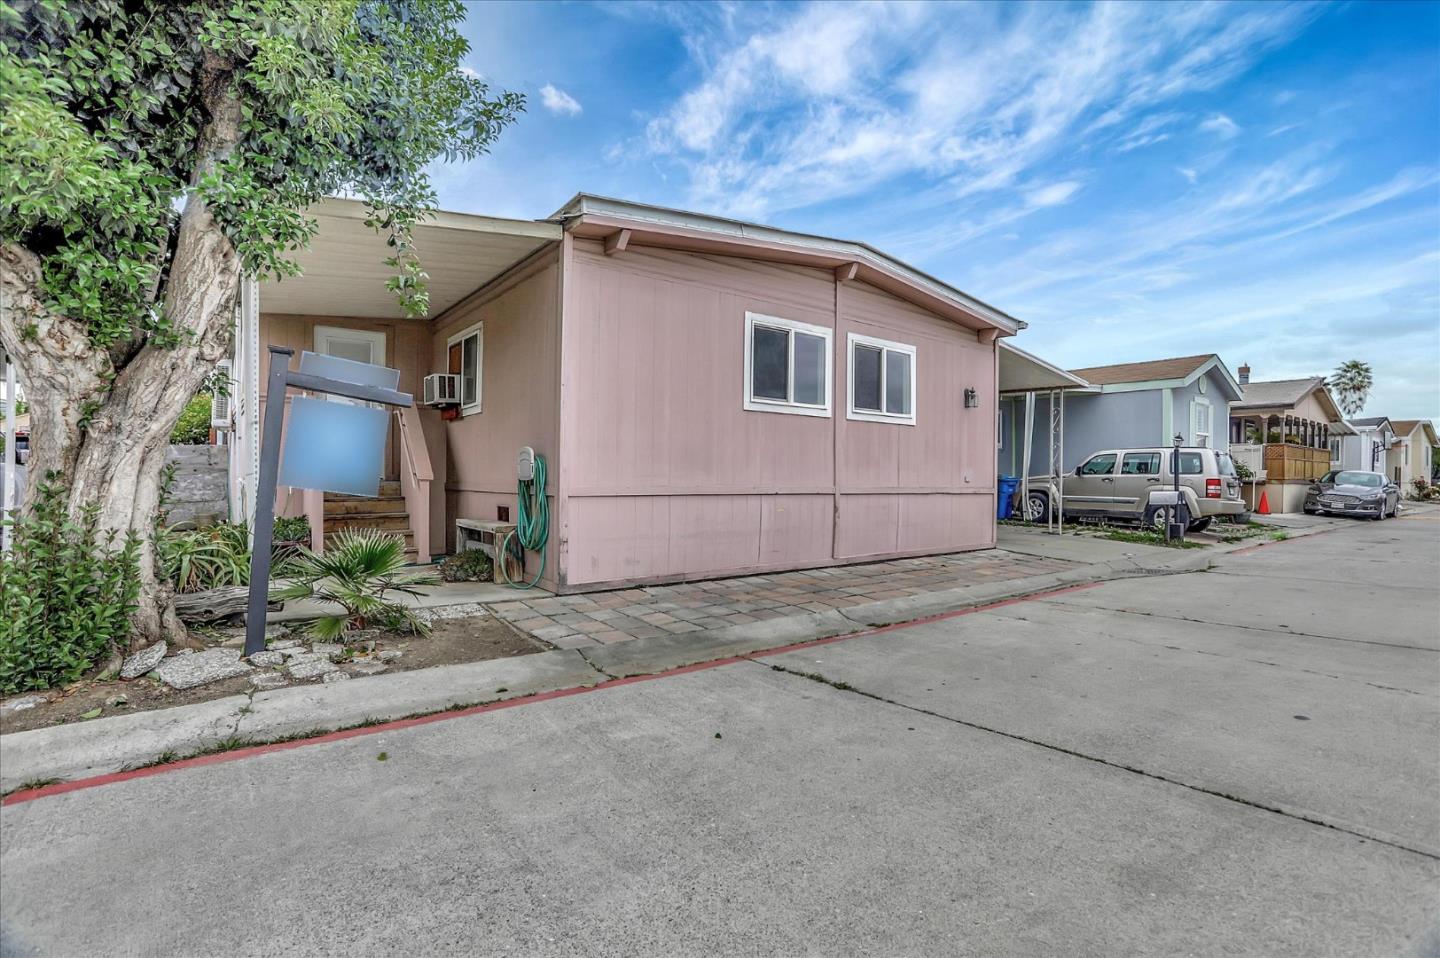 Photo of 182 Elm Dr #182 in Hollister, CA